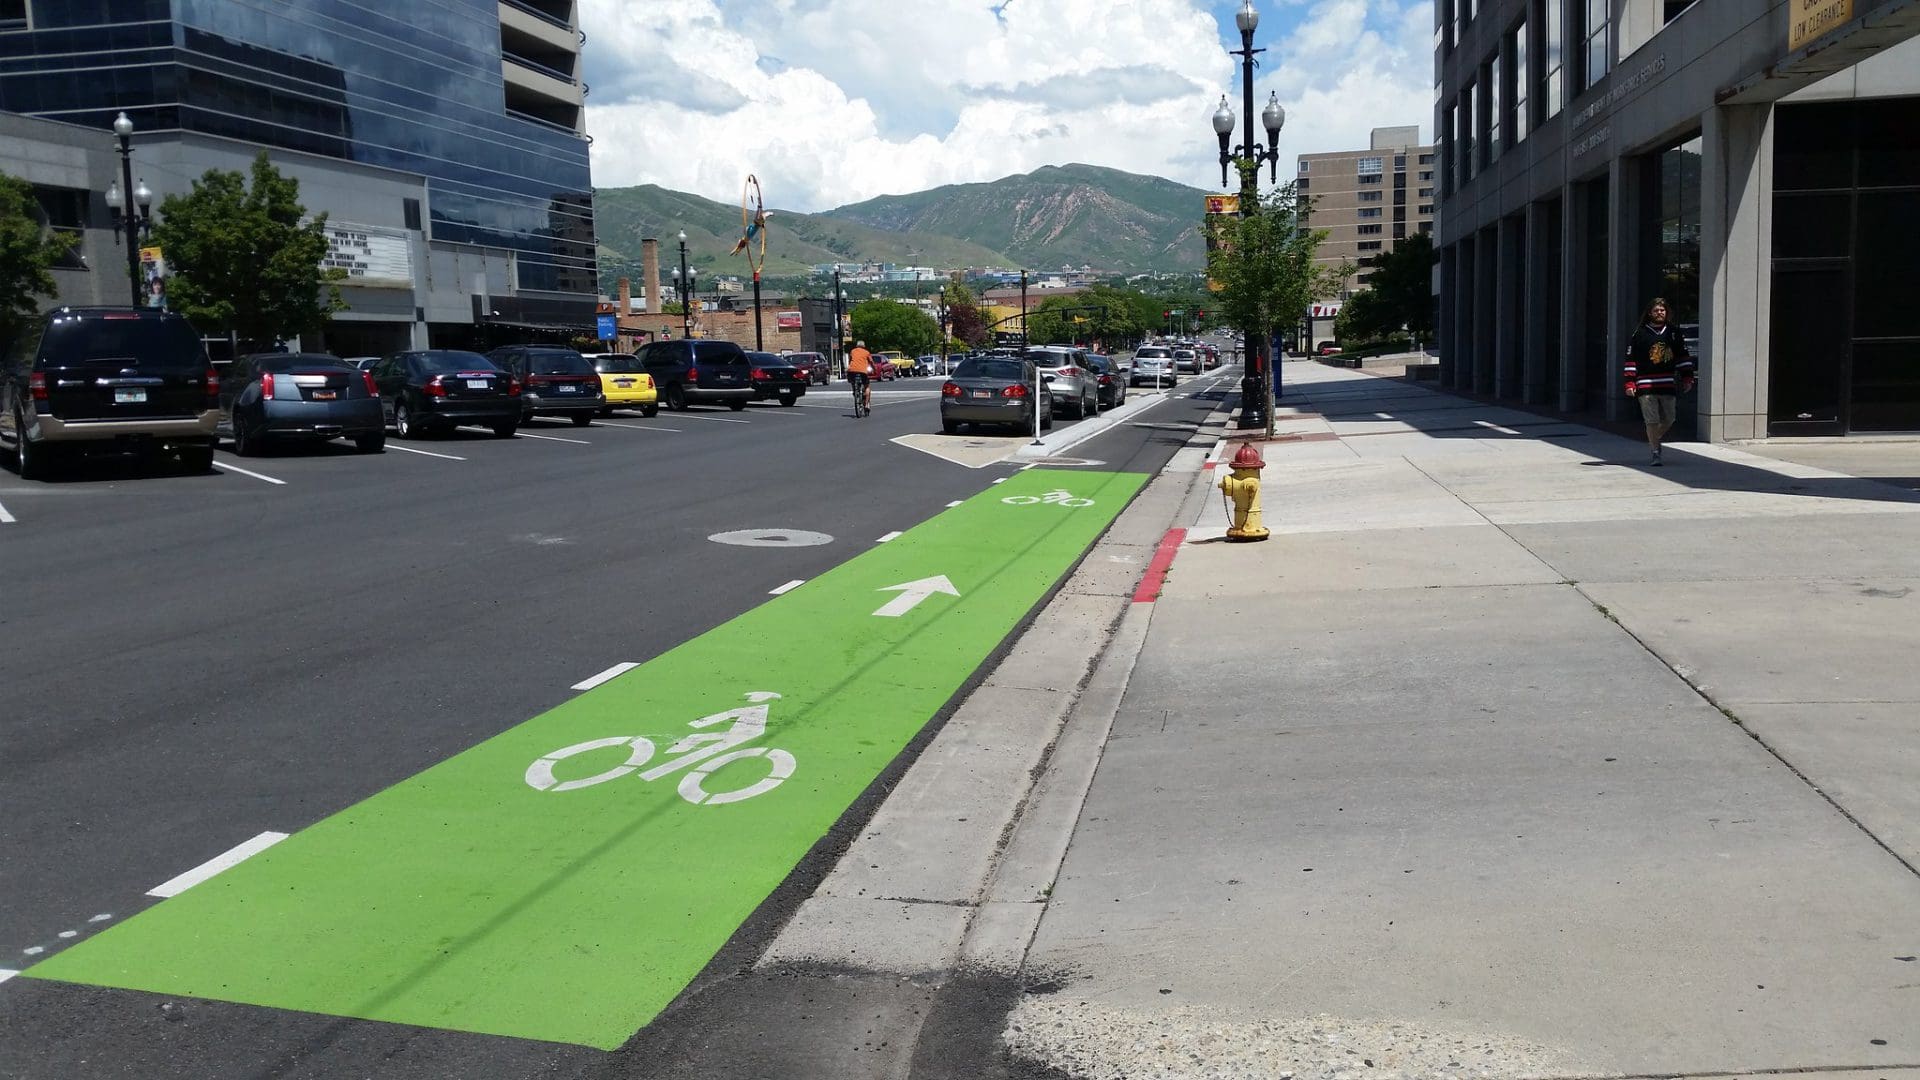 E-Scooters are revitalizing the call for protected bike lanes